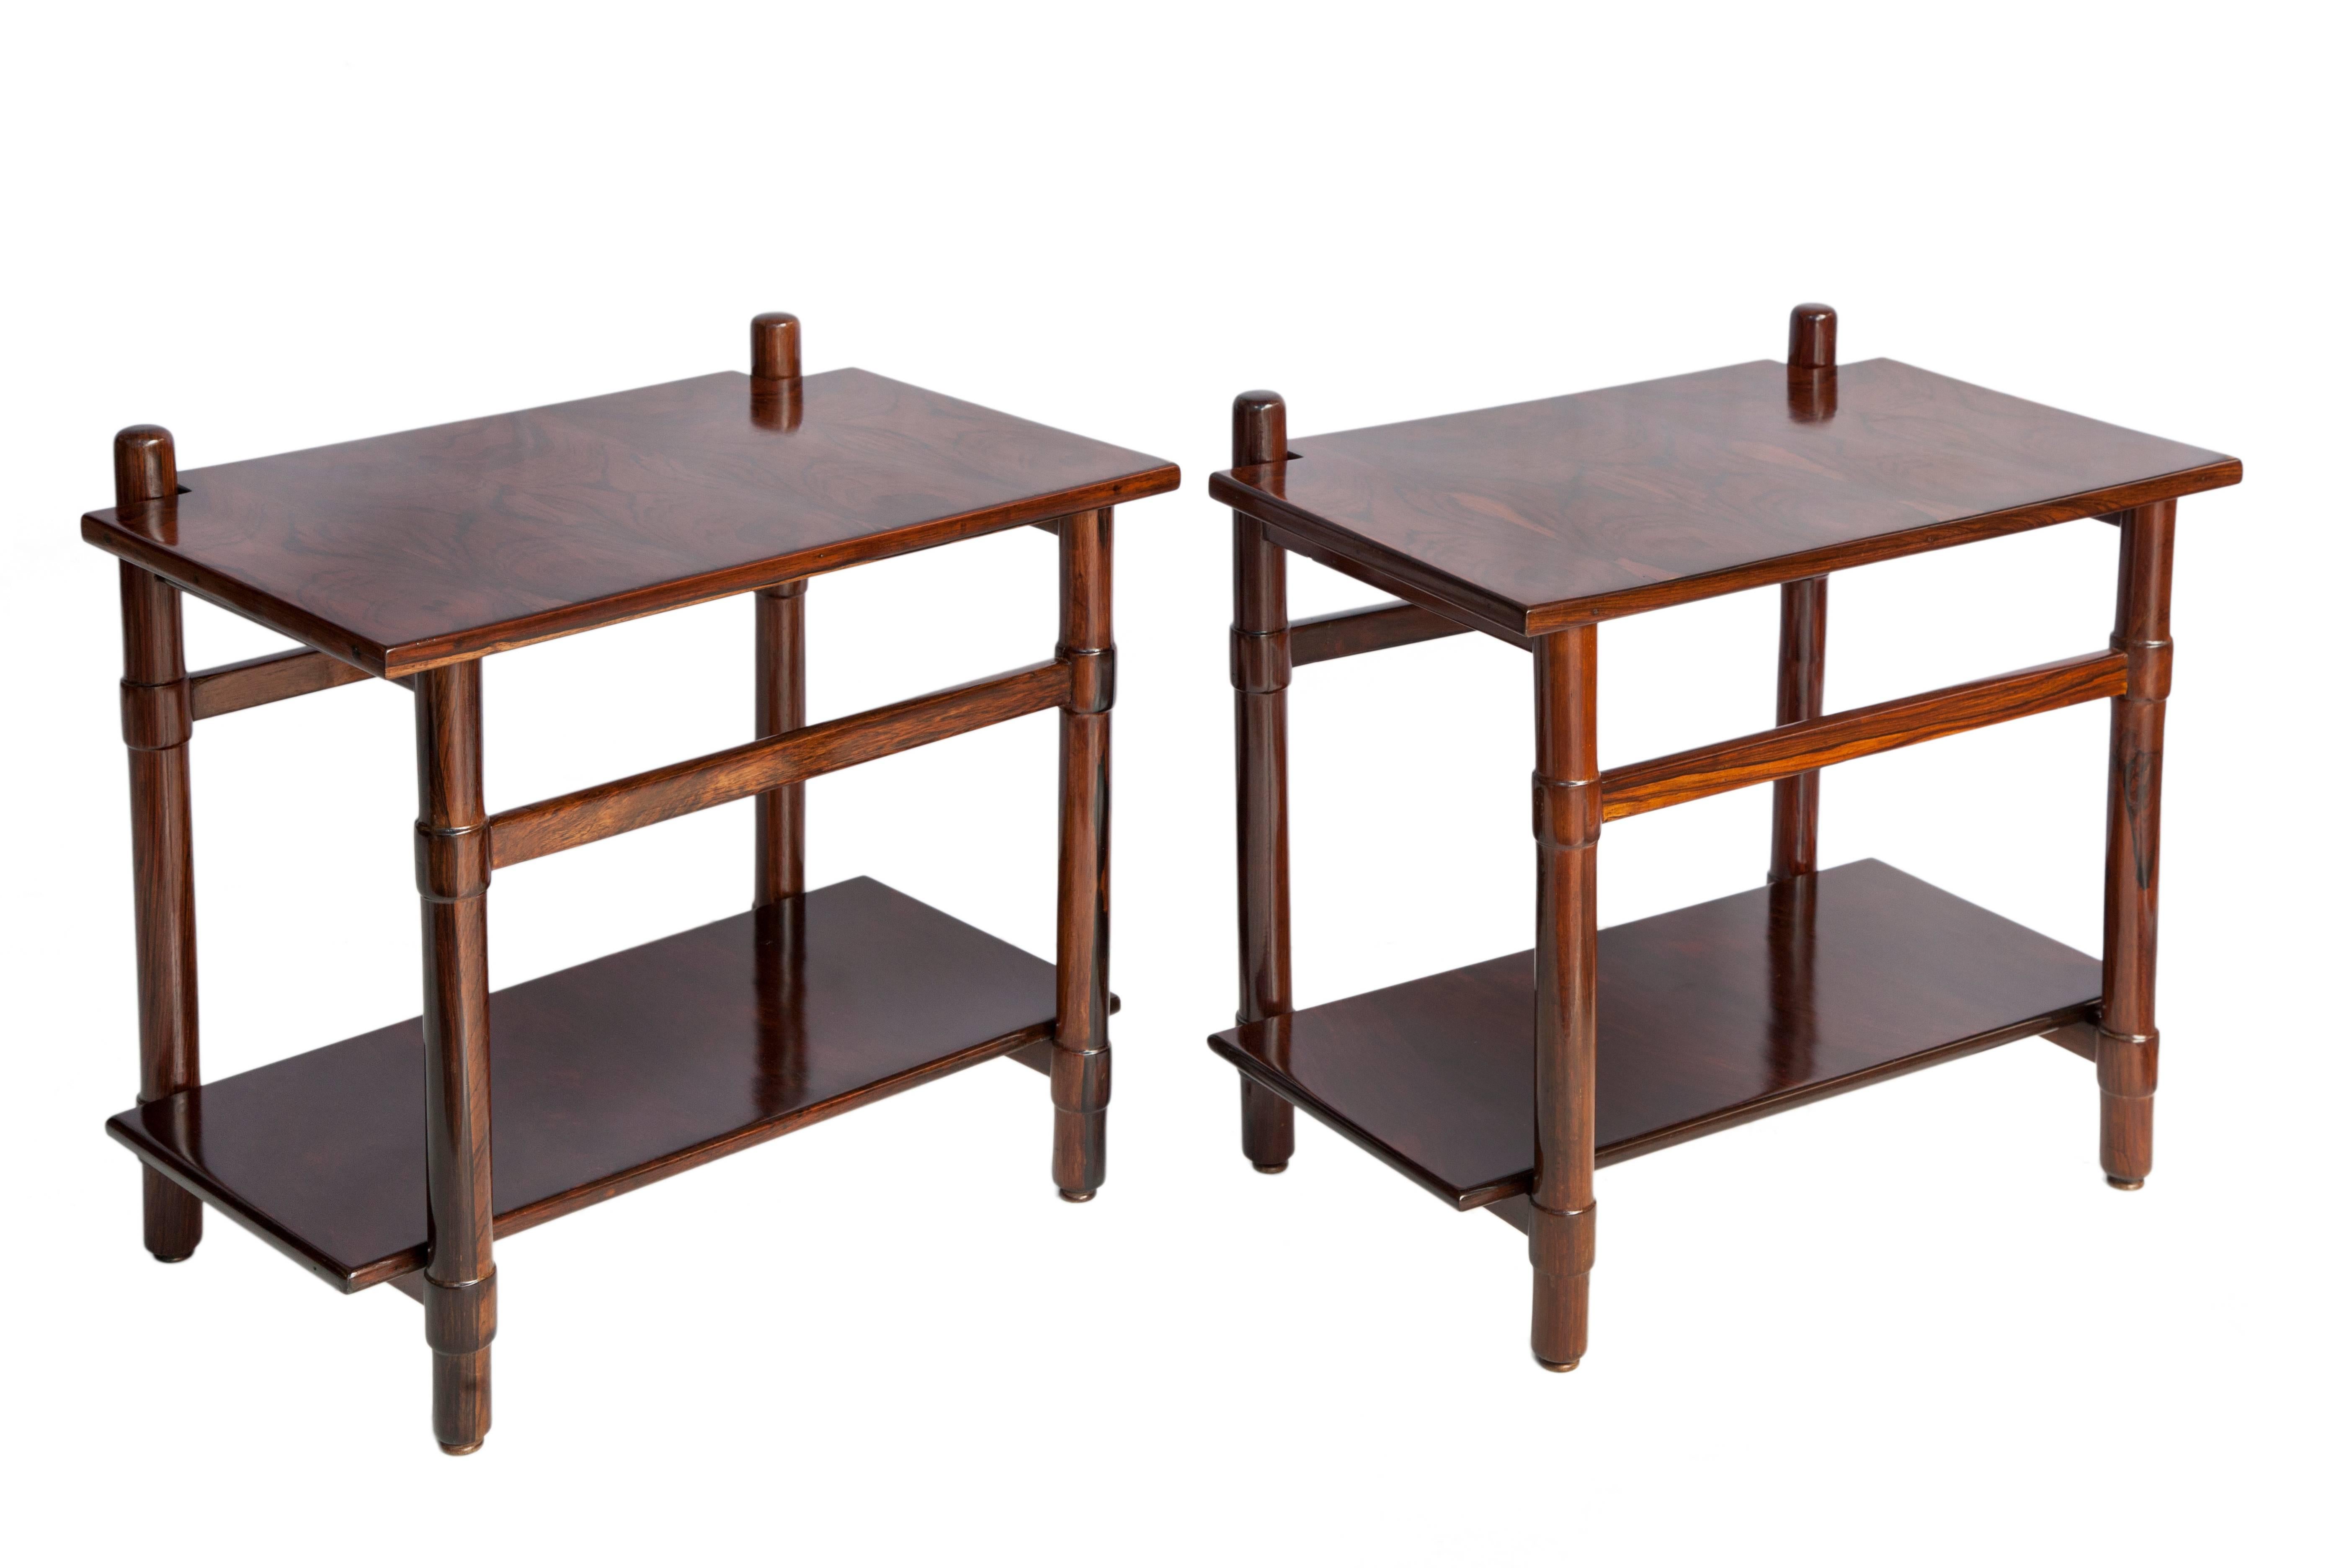 Brazilian Mid-Century Modern Michel Arnoult side tables. Completely crafted in Brazilian Jacaranda wood. Consists of two levels with a solid bottom shelf. Stands on four square legs with trestle accents. The pair are in good vintage condition with